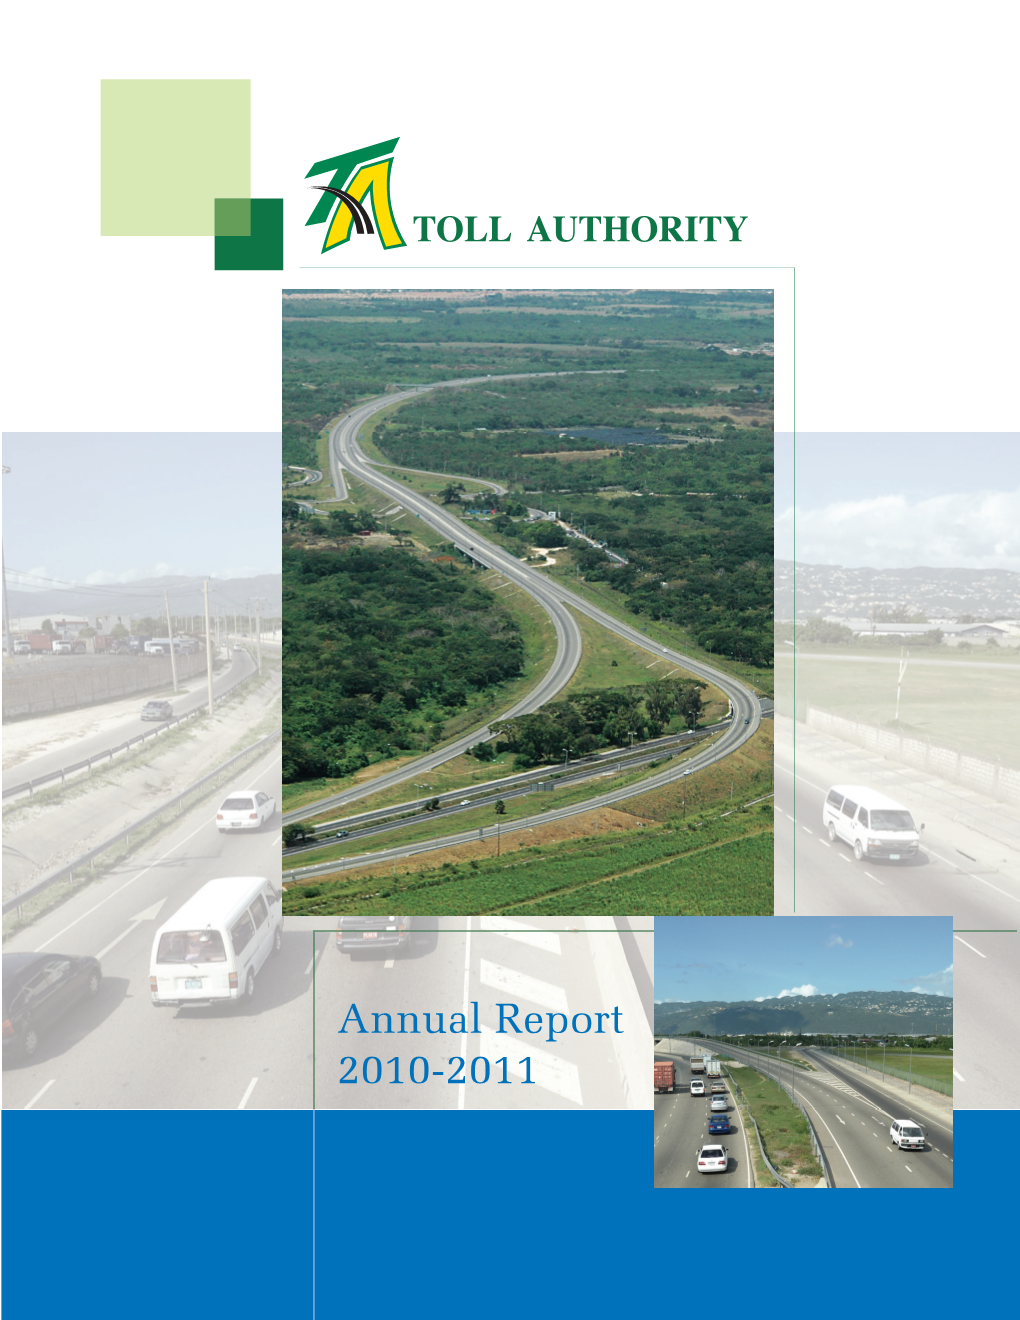 Toll Authority Annual Report 2010-2011 Message from the Minister